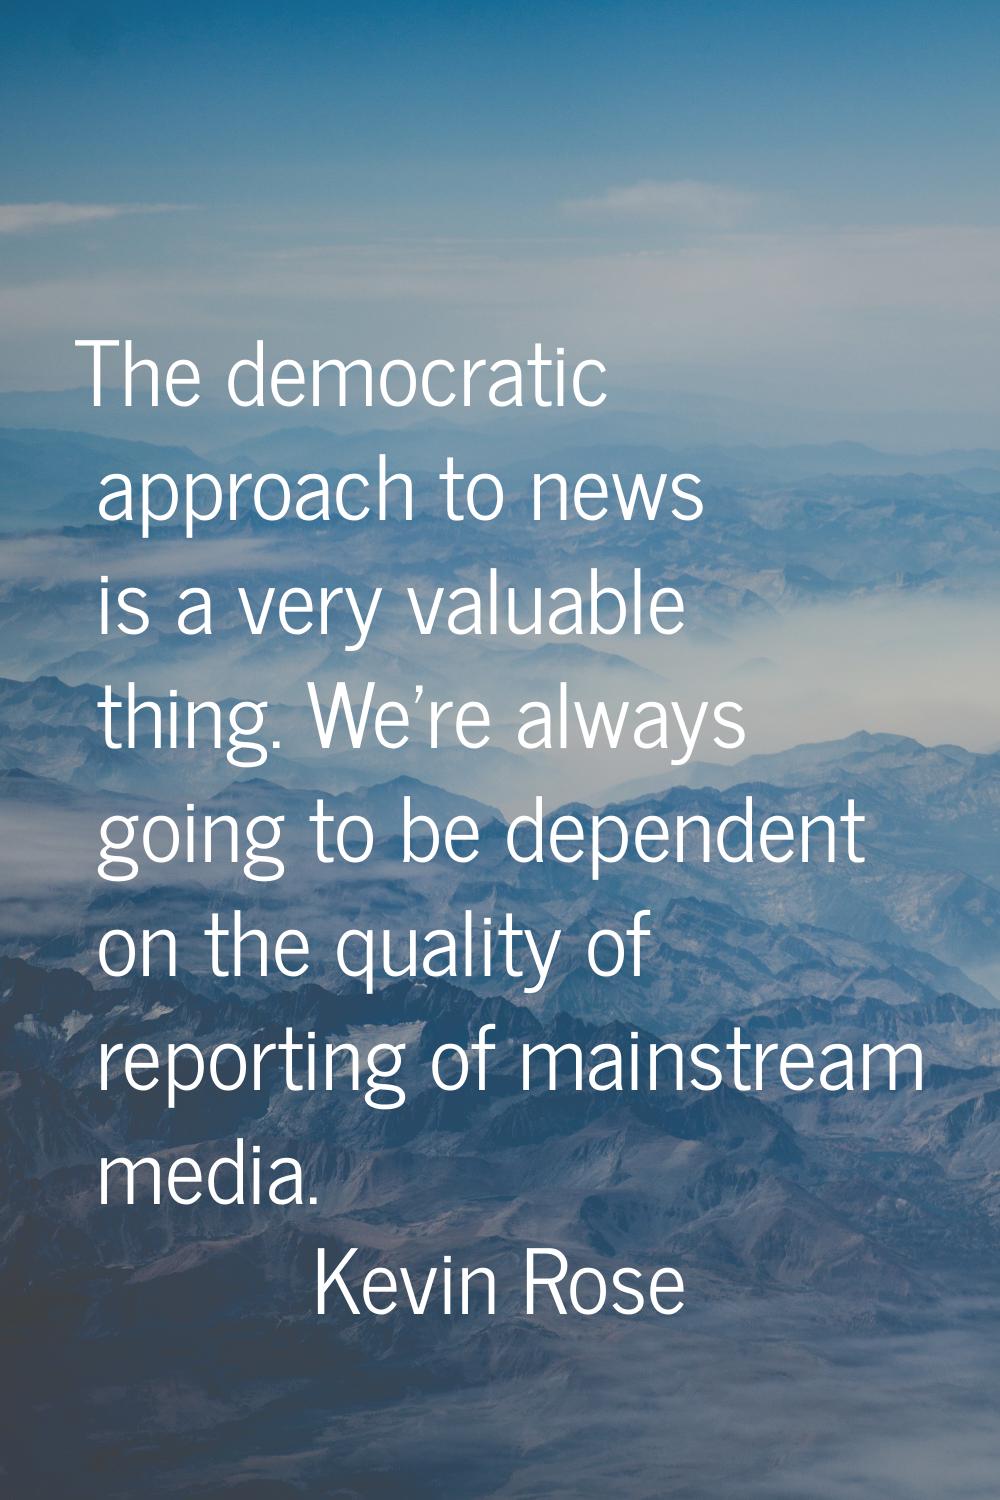 The democratic approach to news is a very valuable thing. We're always going to be dependent on the